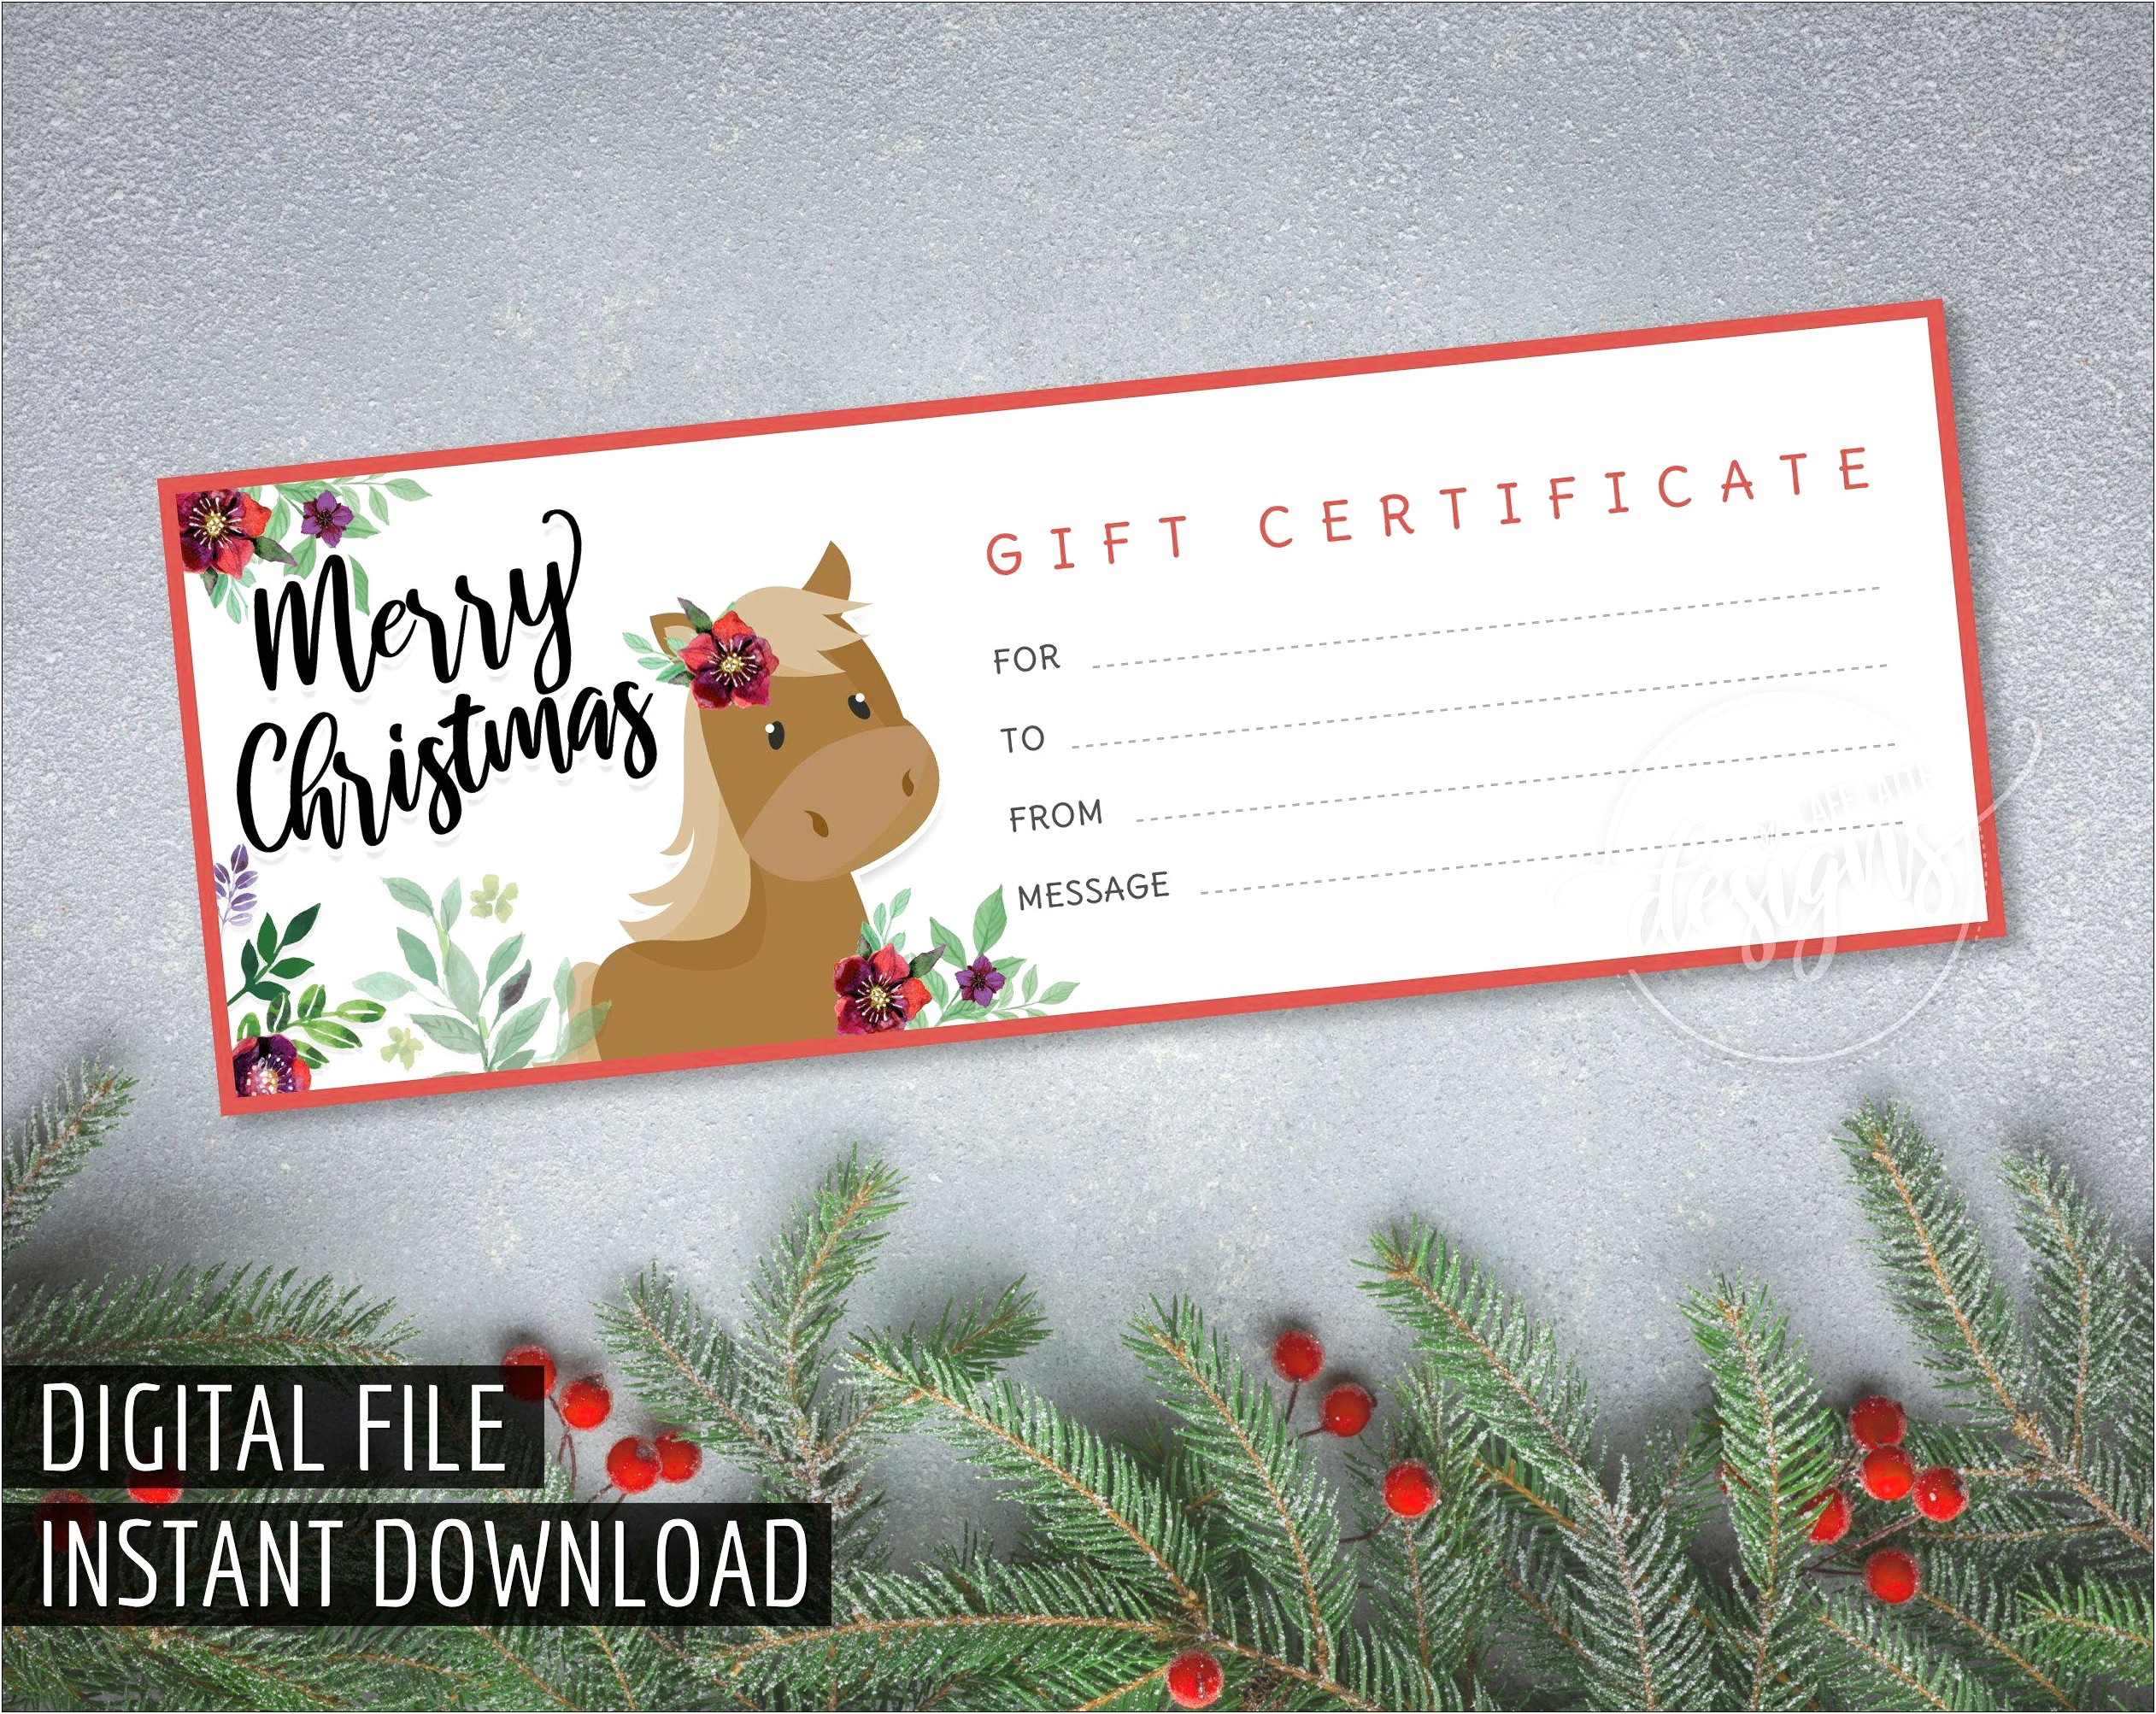 Free Gift Certificate Templates For Horseback Riding Lessons